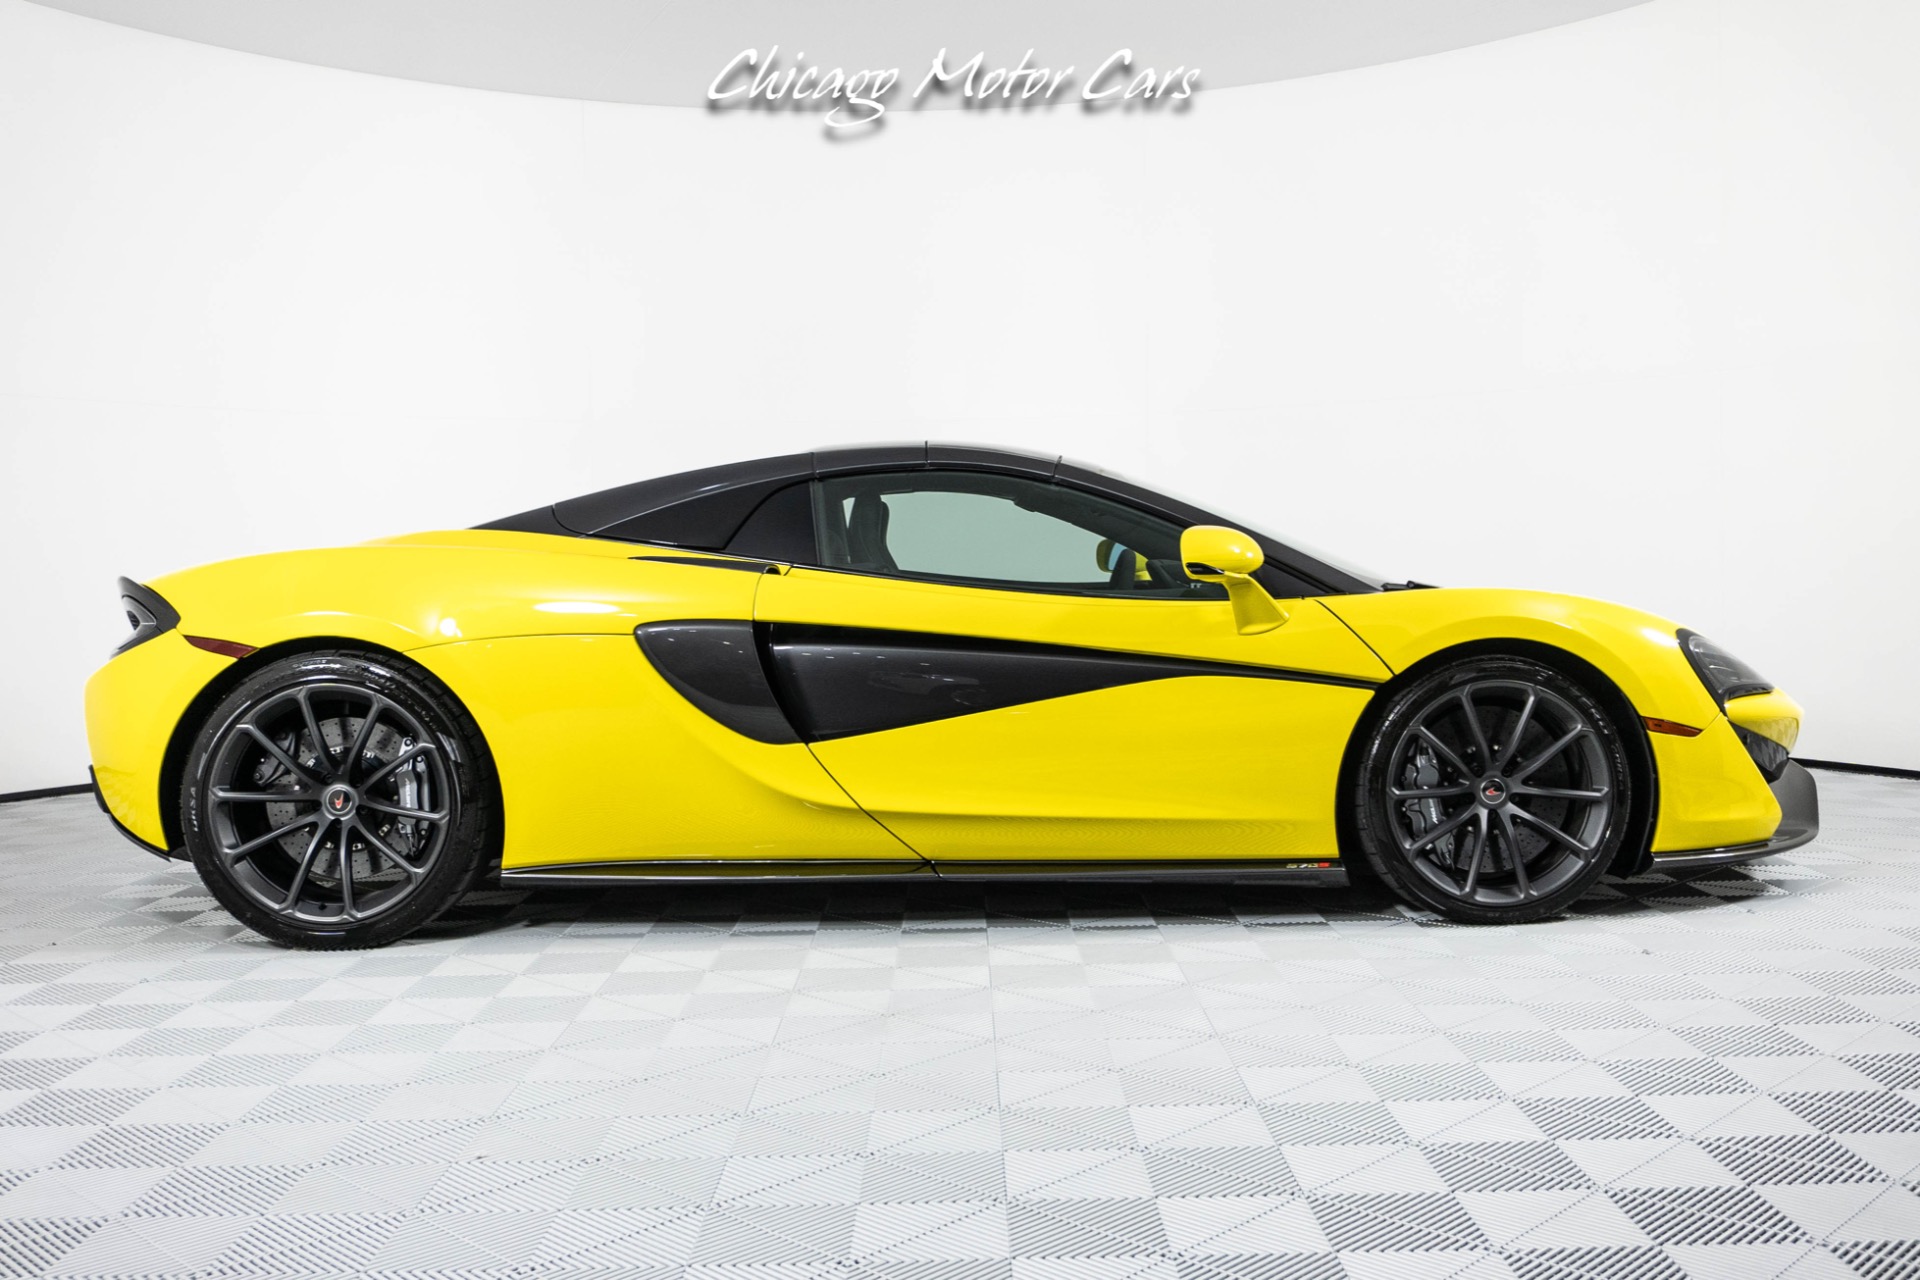 Used-2018-McLaren-570S-Spider-VEHICLE-FRONT-LIFT-SYSTEM-LOW-MILES-SPORT-EXHAUST